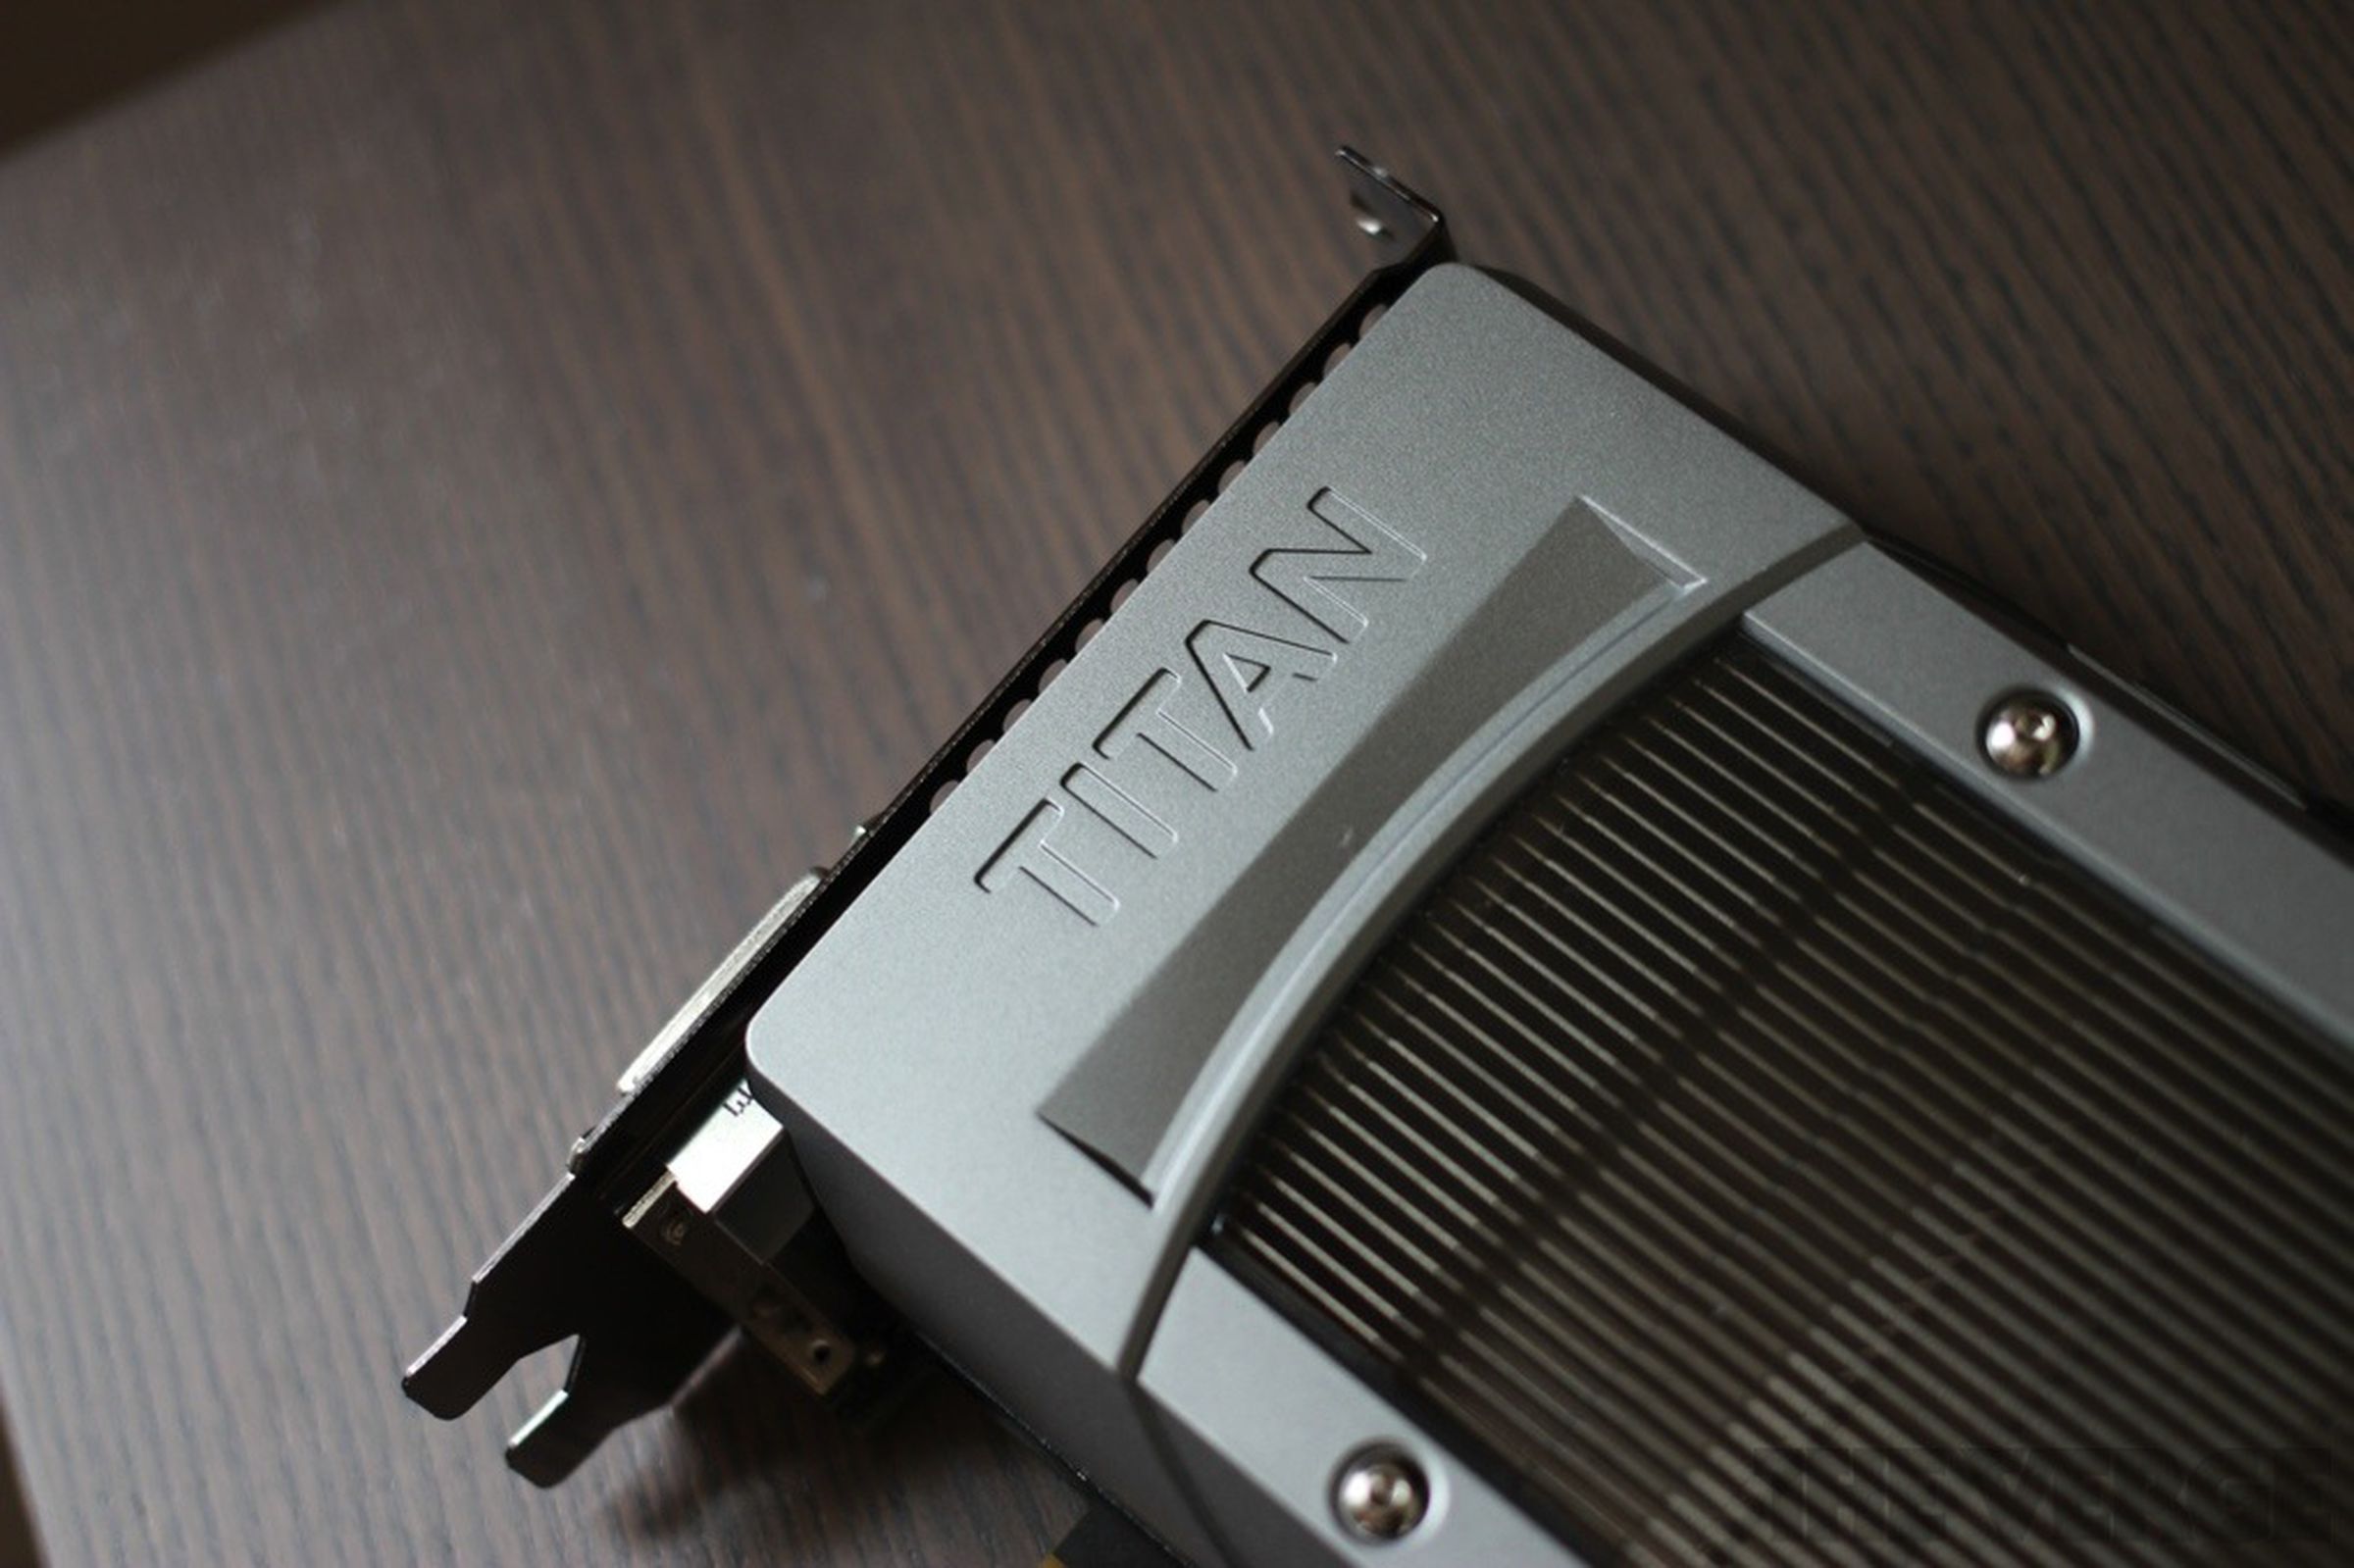 Nvidia GeForce GTX Titan hands-on pictures